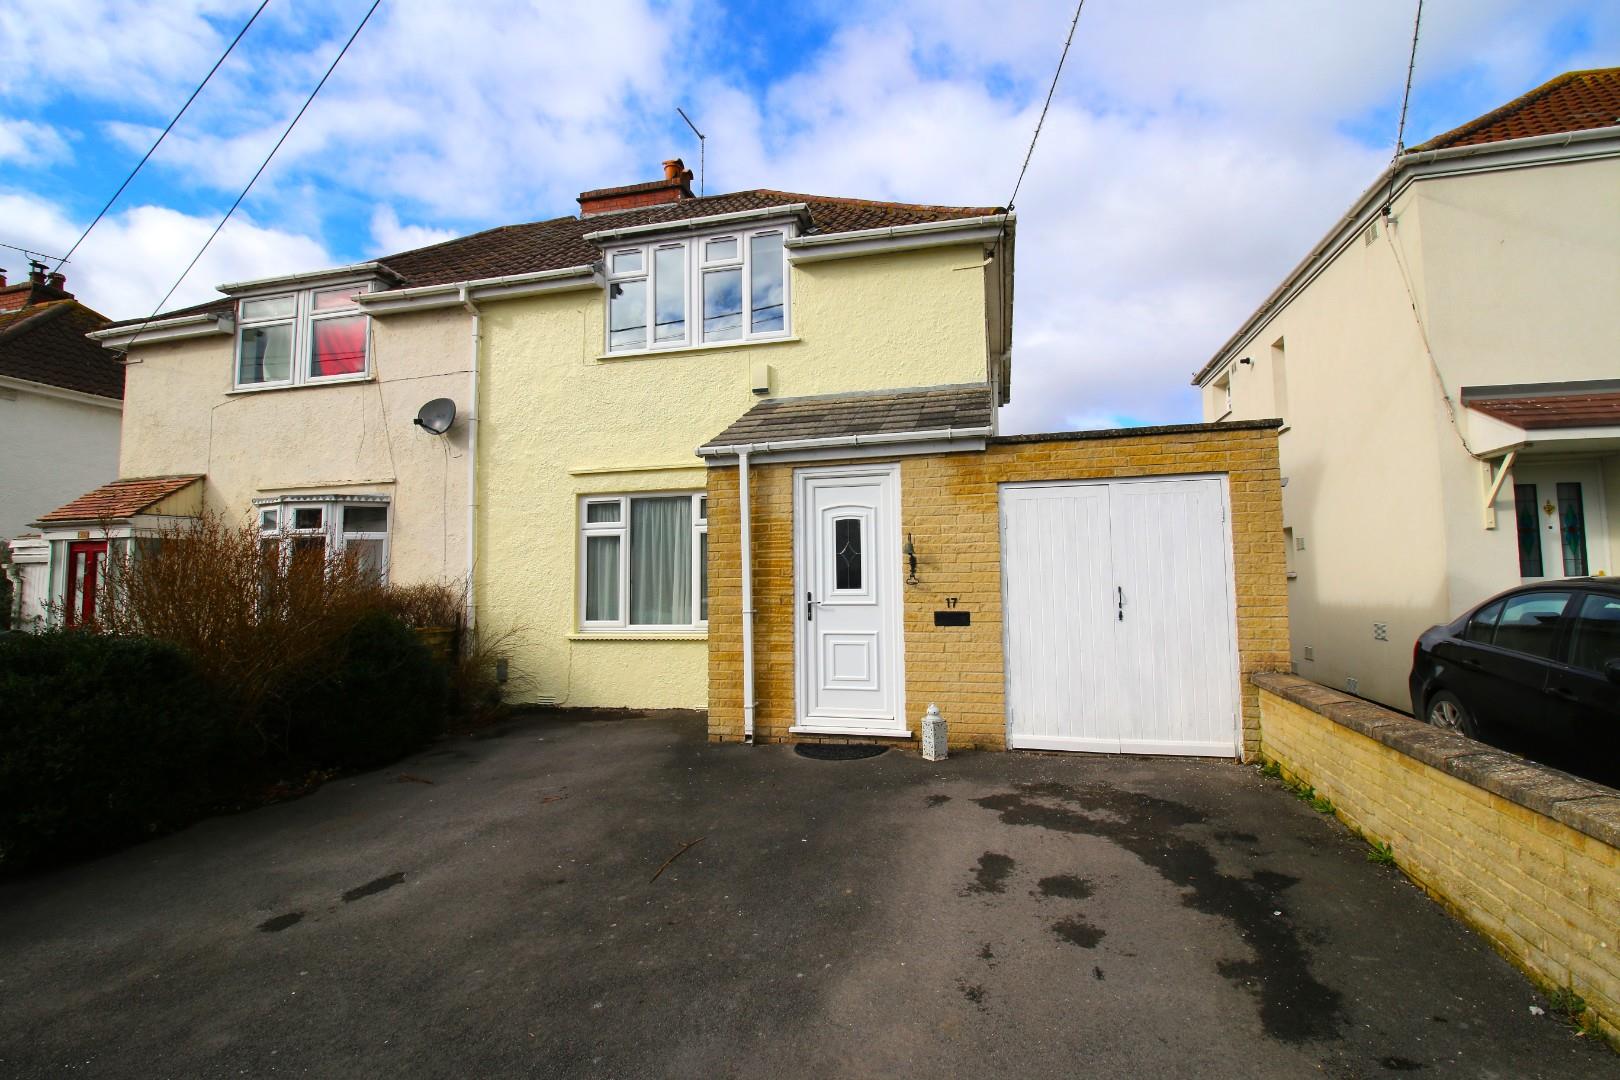 Beautifully presented three bedroom home offering fantastic value for money in Yatton village